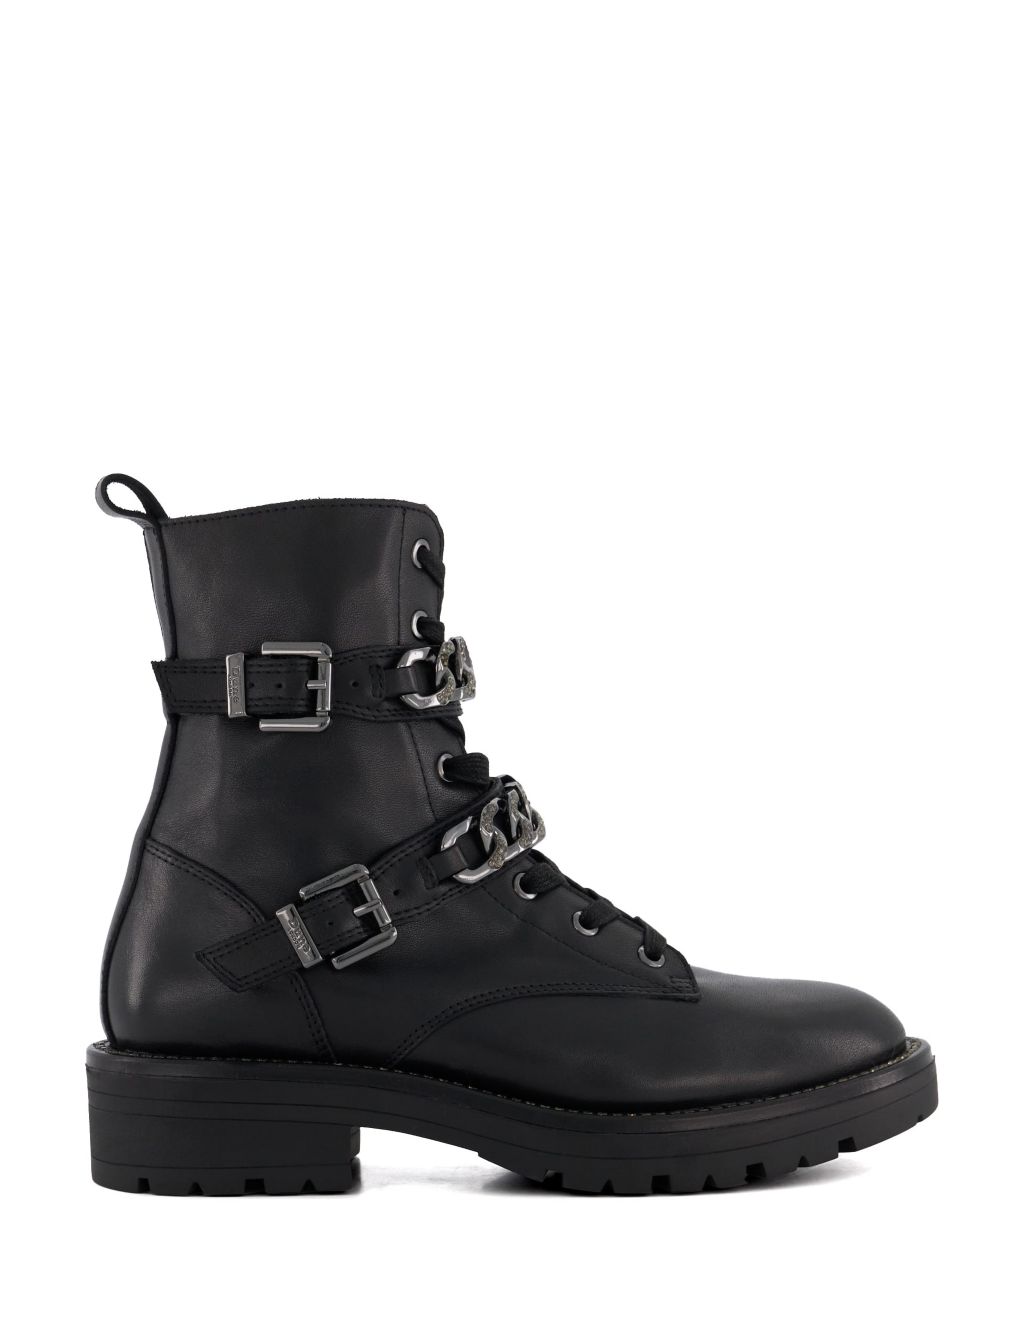 Leather Biker Lace Up Flat Ankle Boots image 1